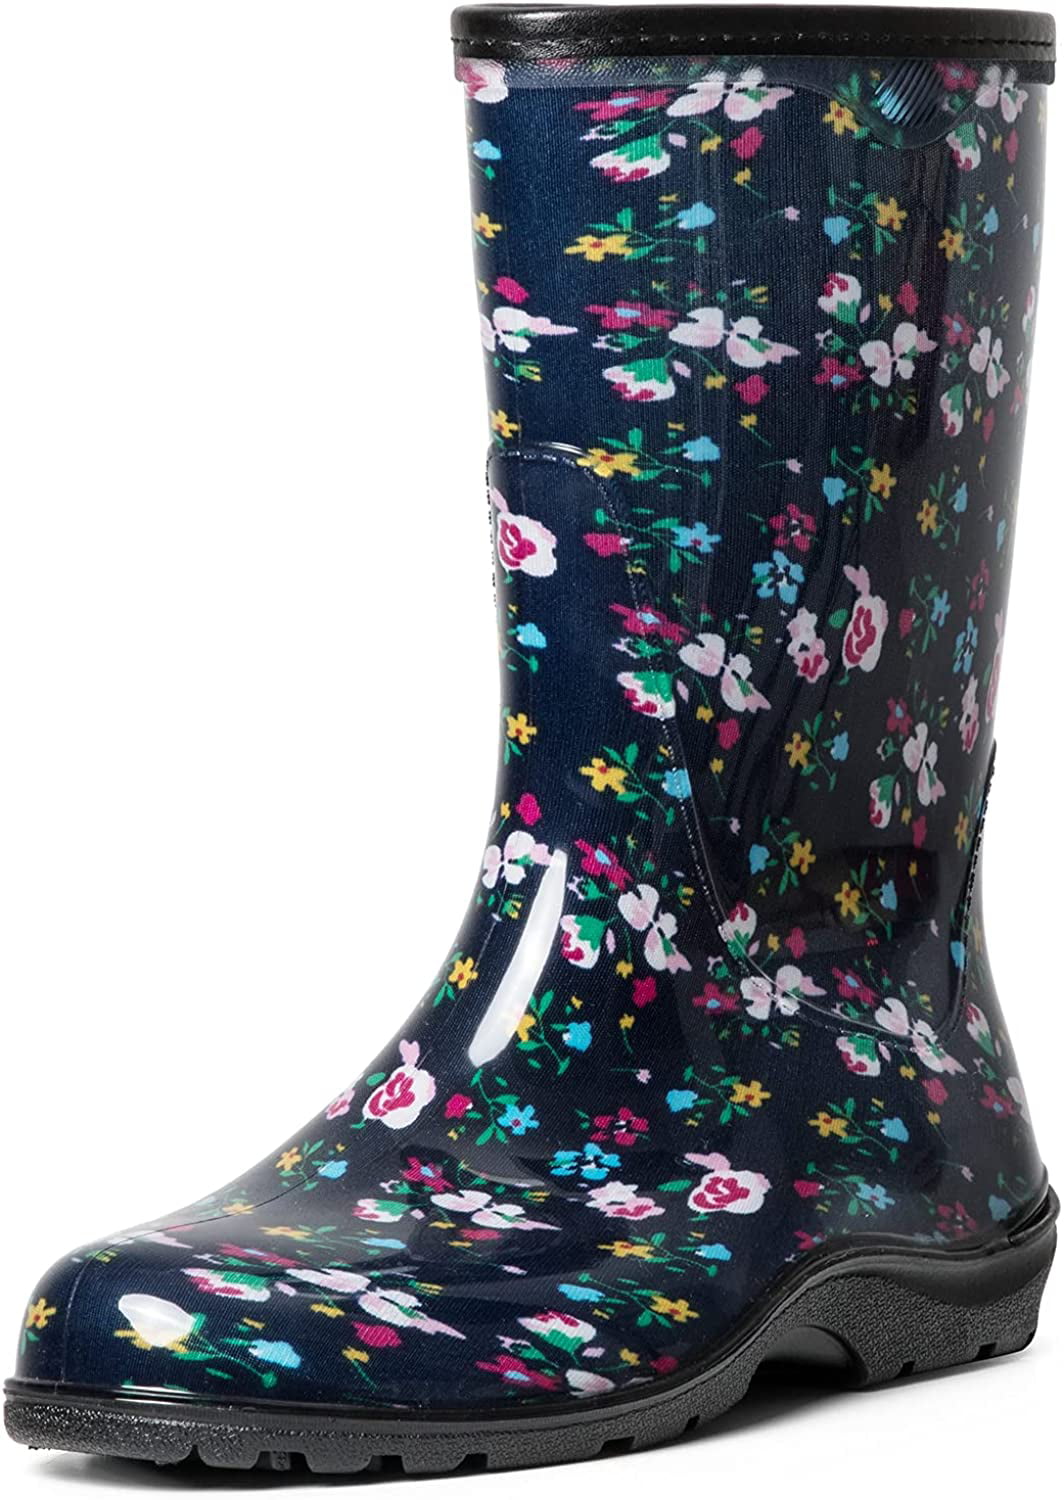 Colorful Printed Mid-Calf Garden Shoes with Comfort Insole Ladies Short Rain Boots K KomForme Womens Waterproof Rain Boots 